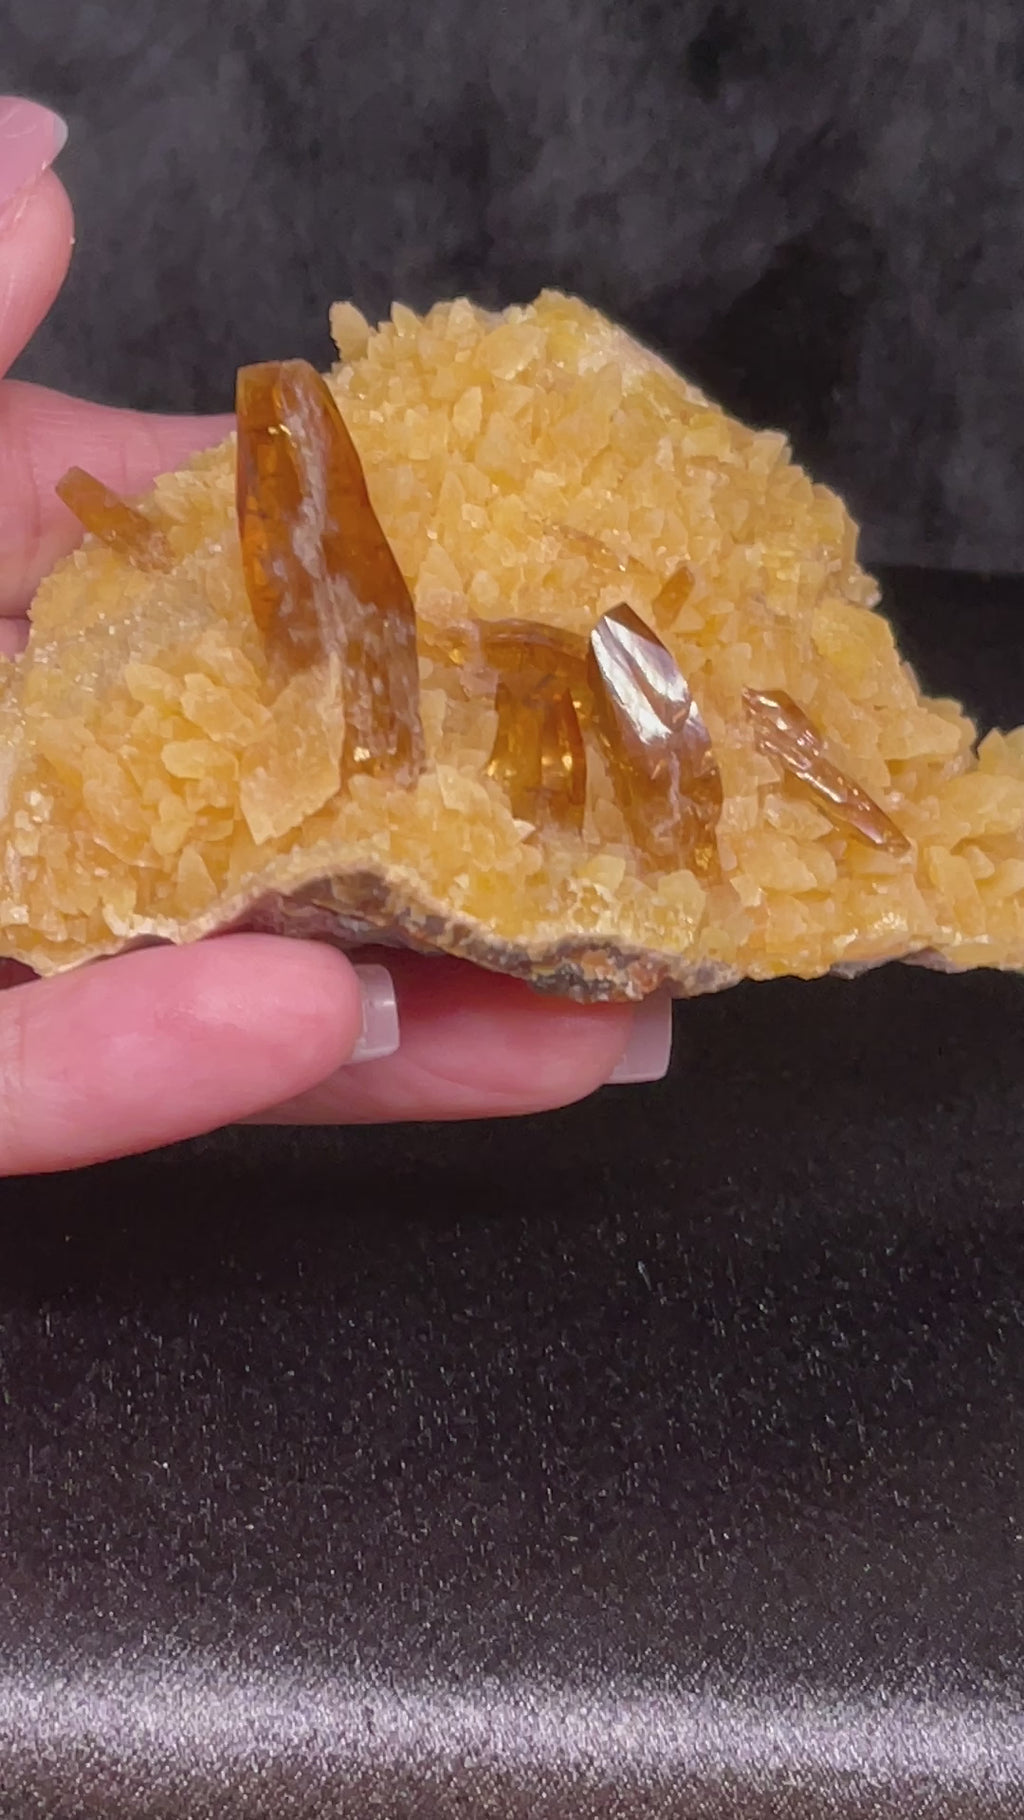 This is a truly excellent Barite on Yellow Calcite piece that will be an excellent addition to your collection or to give as a gift.